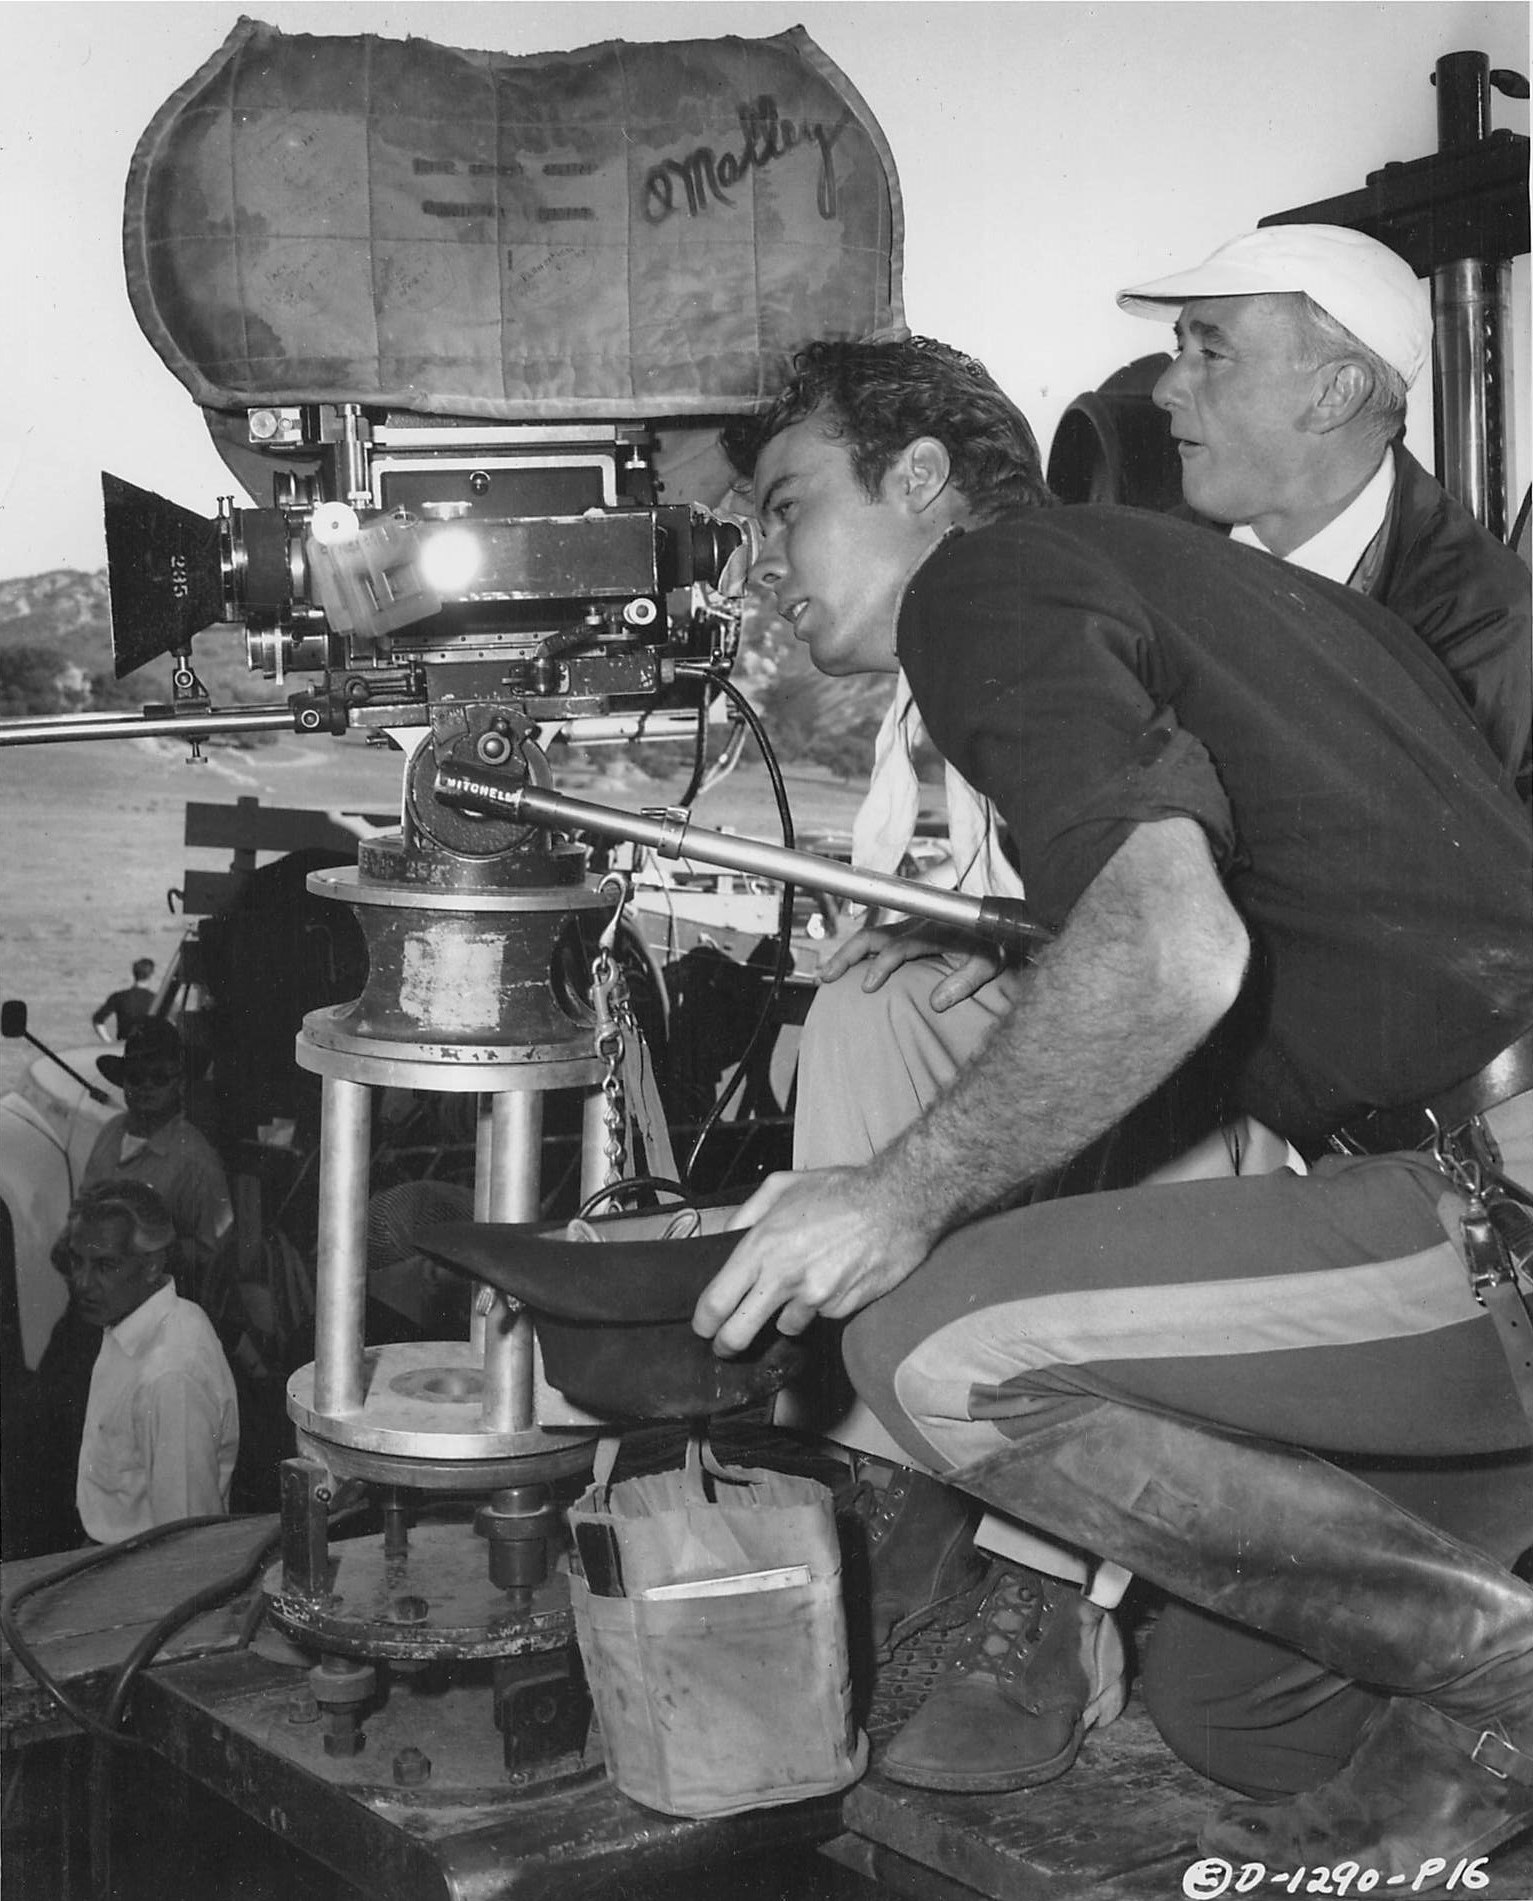  Bob with Charles Lawton, Jr., Director of Photography,  They Rode West . On location Fall 1953.  Lawton began as assistant cameraman at First National in 1926, working under  George J. Folsey . Briefly at Paramount, then joined MGM (1936-1943), with